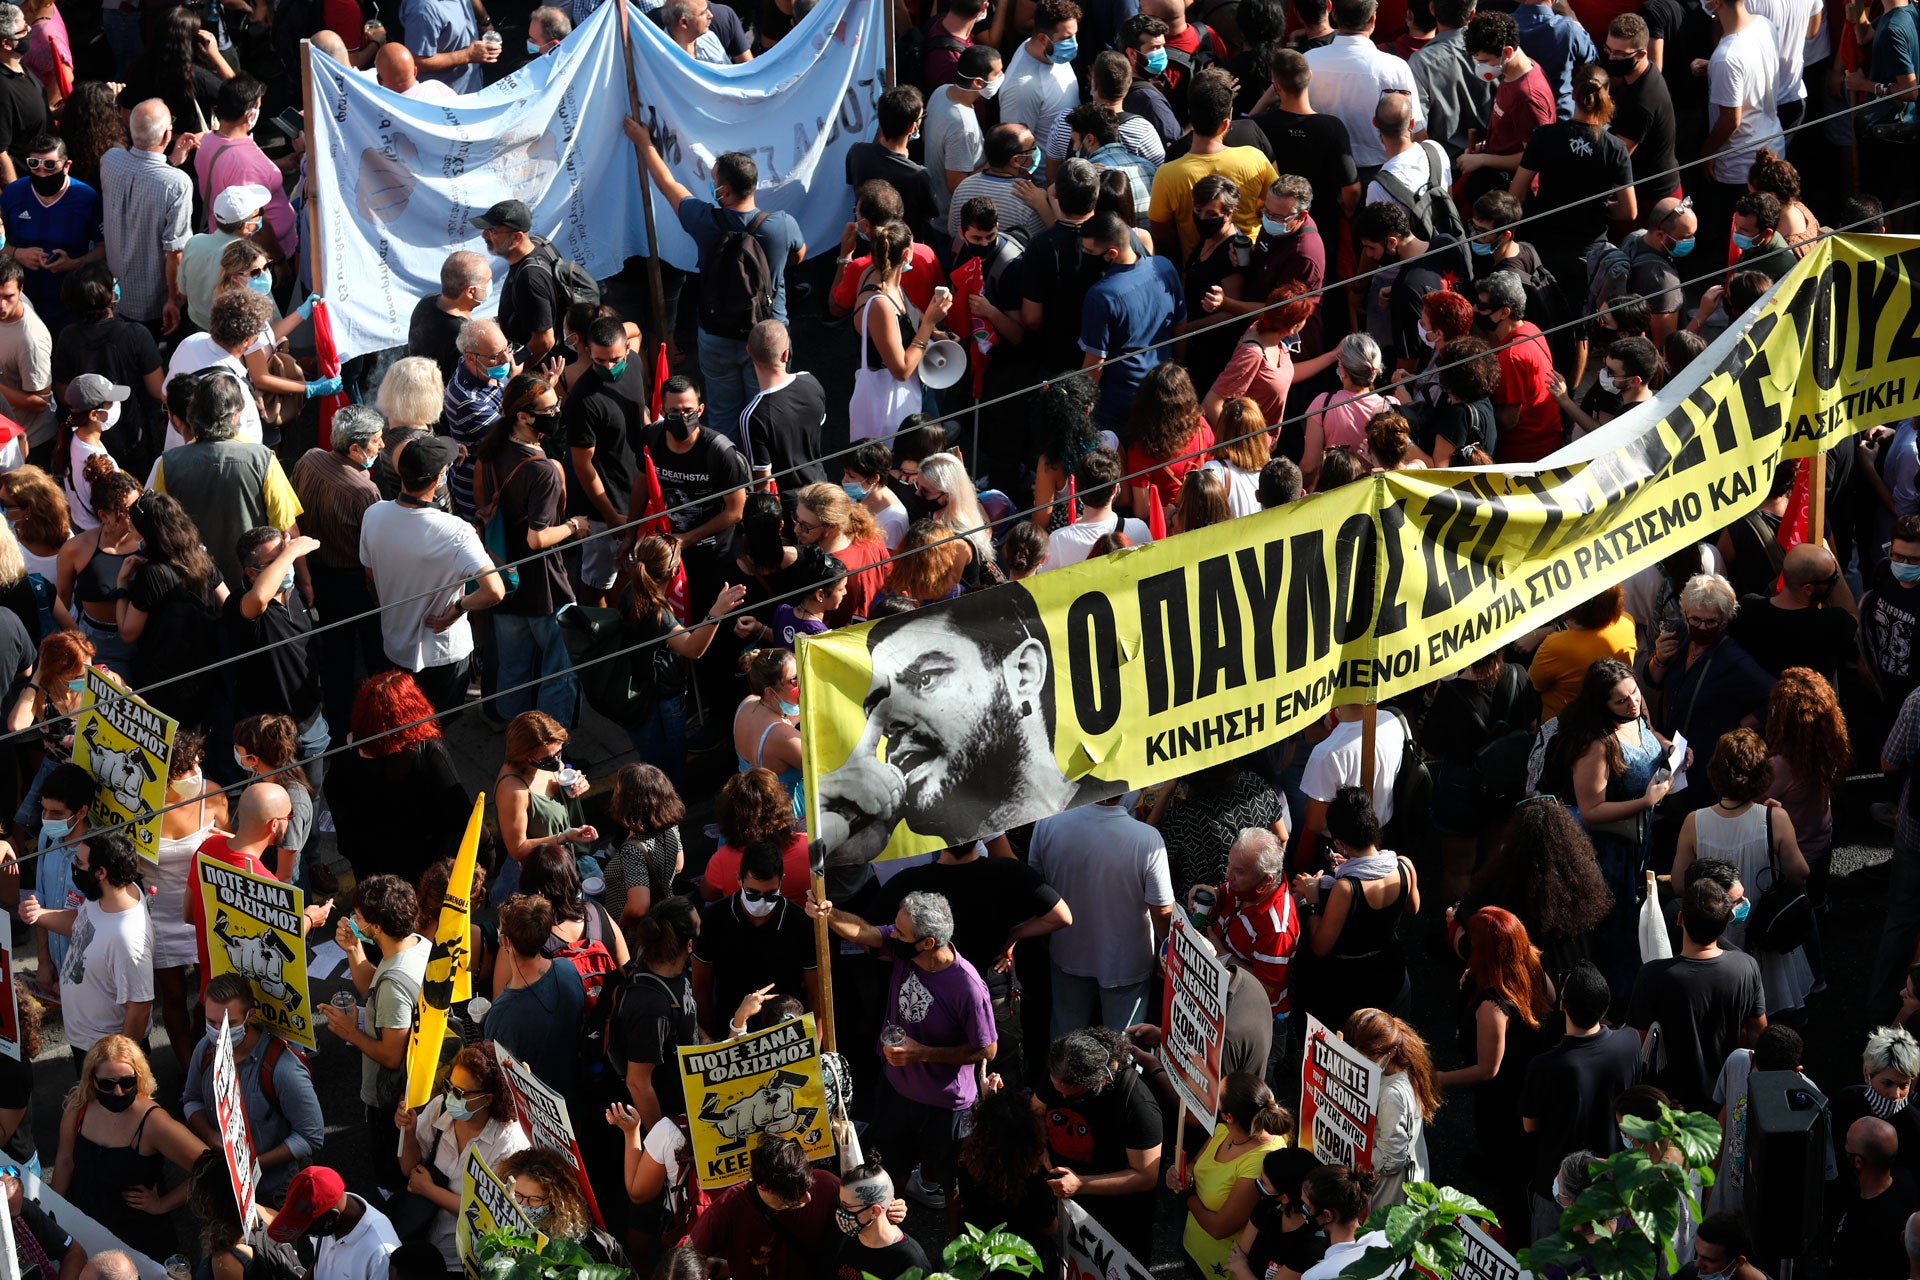 People holding a banner depicting Greek rap singer Pavlos Fyssas, who was stabbed and killed by a supporter of the extreme right Golden Dawn party in 2013, gather for a protest outside a court in Athens, Wednesday, October 7, 2020. 